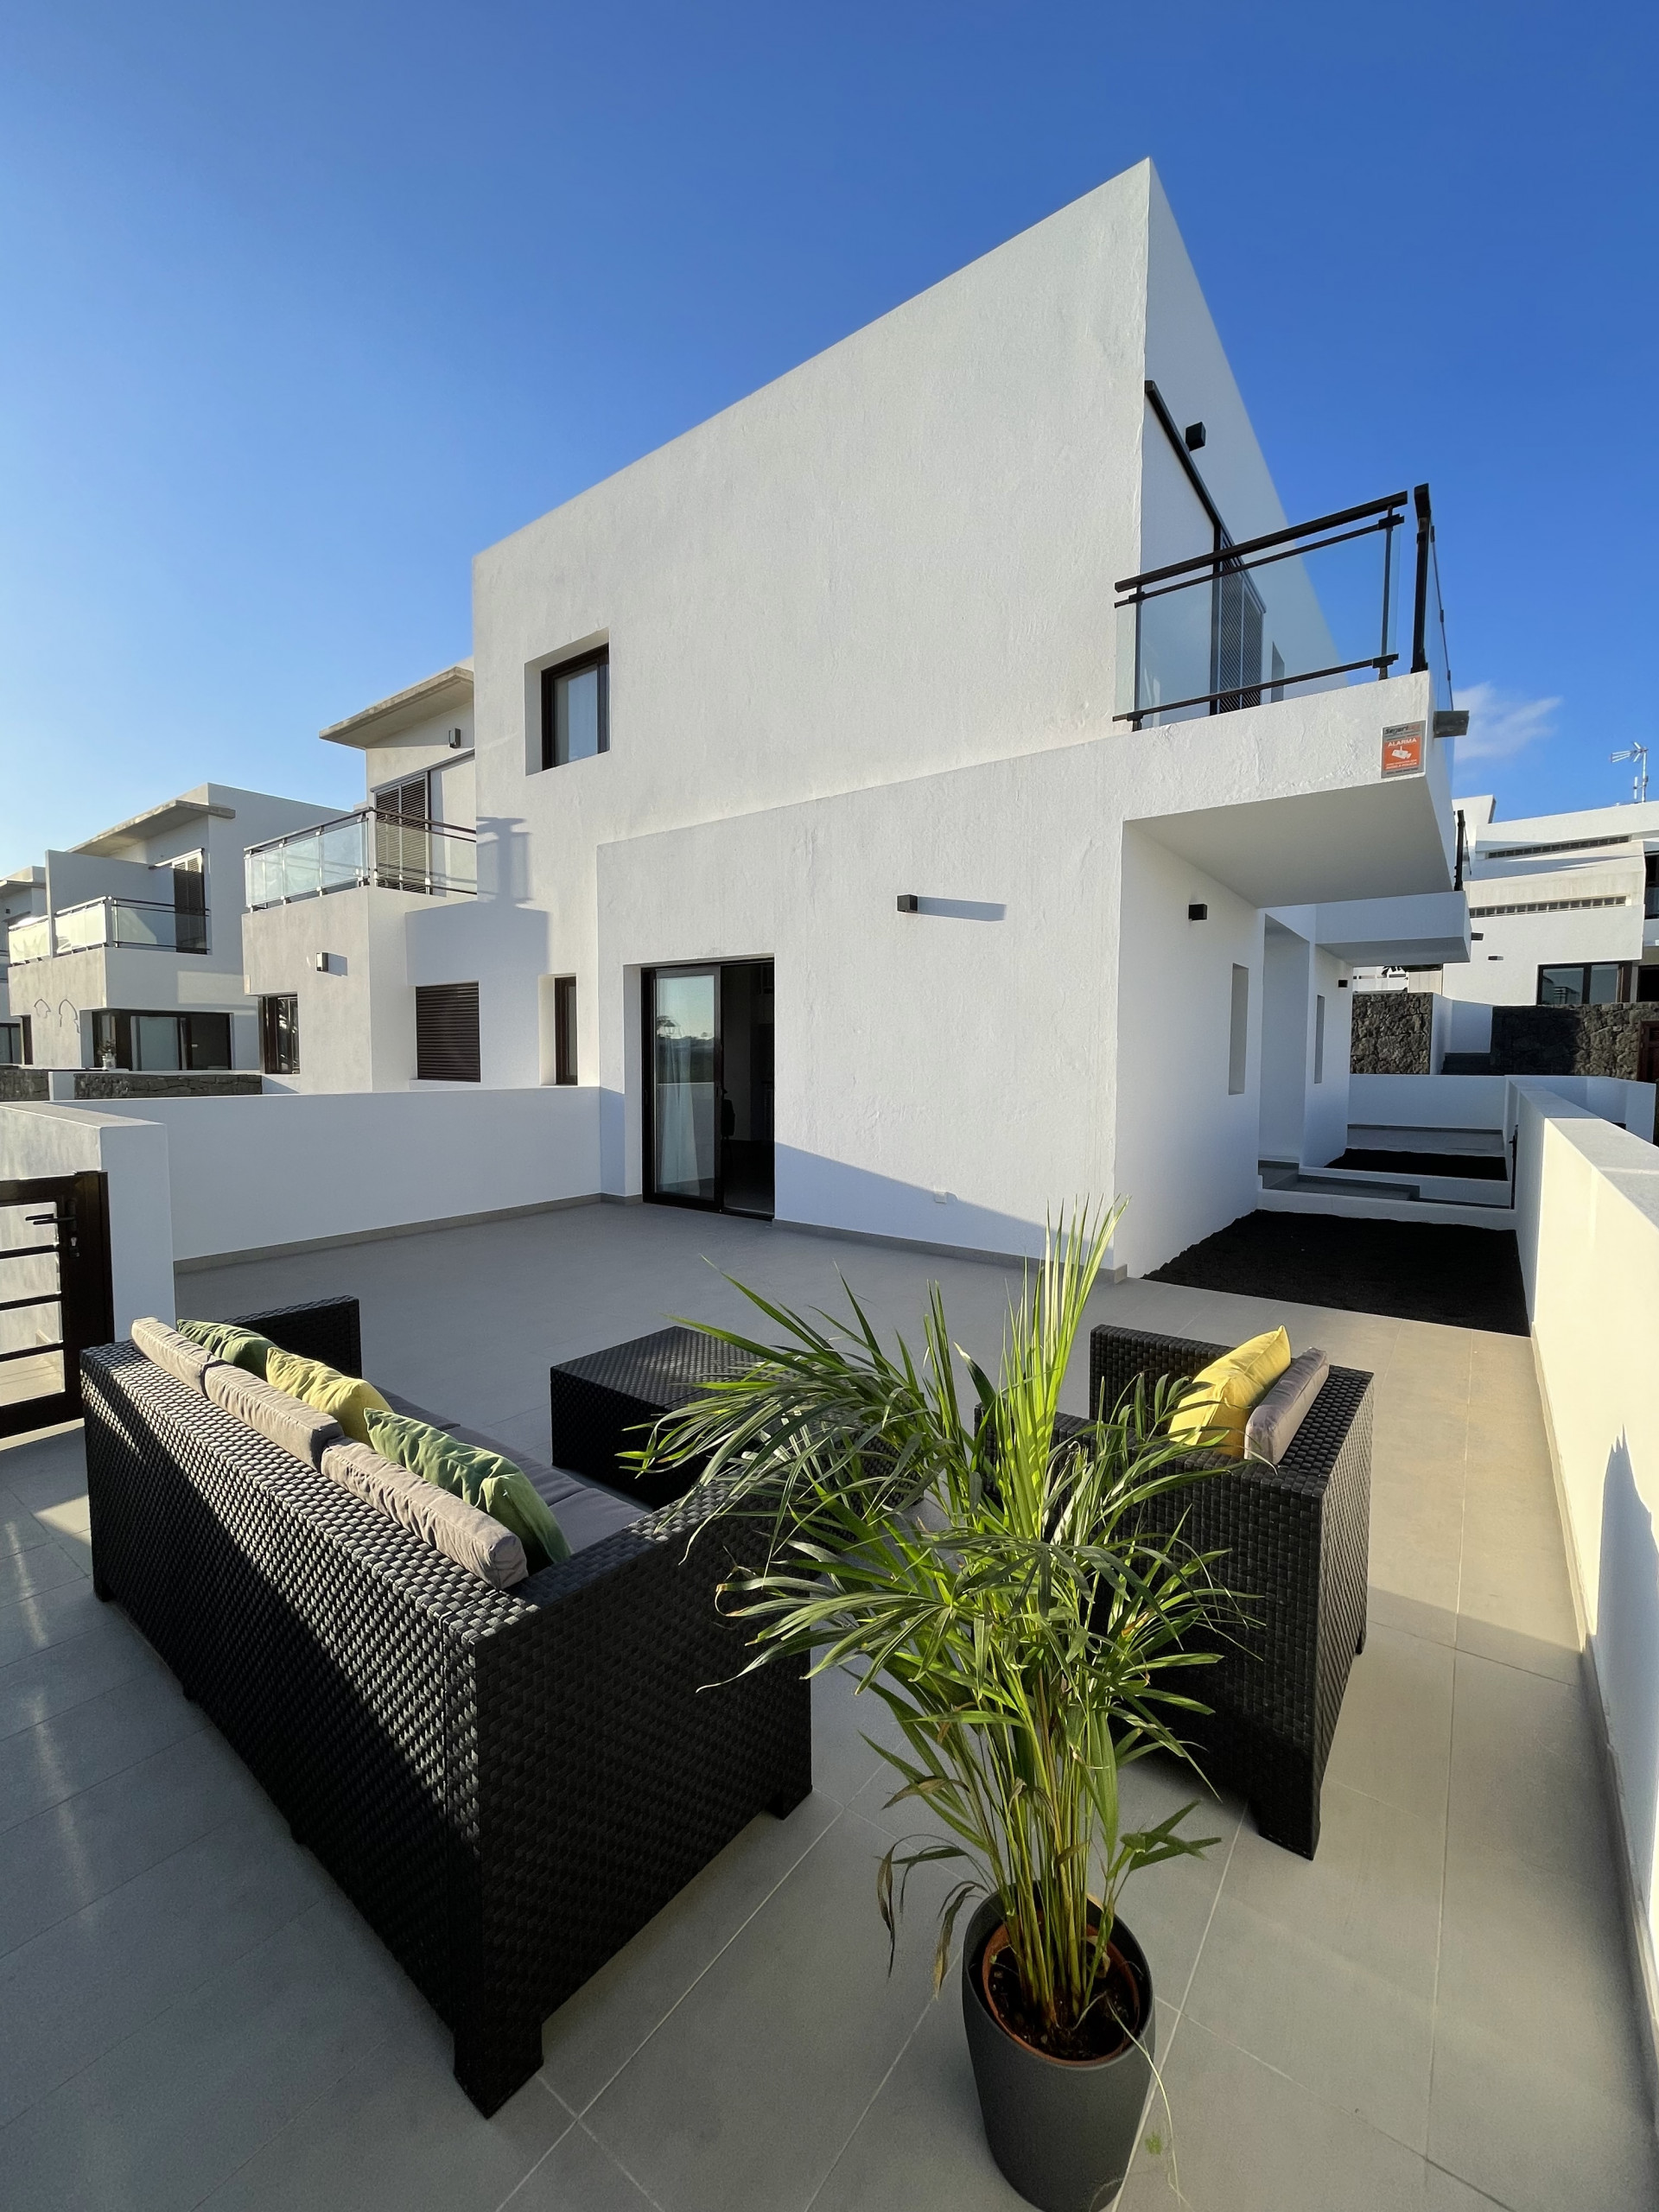 Costa Teguise - House